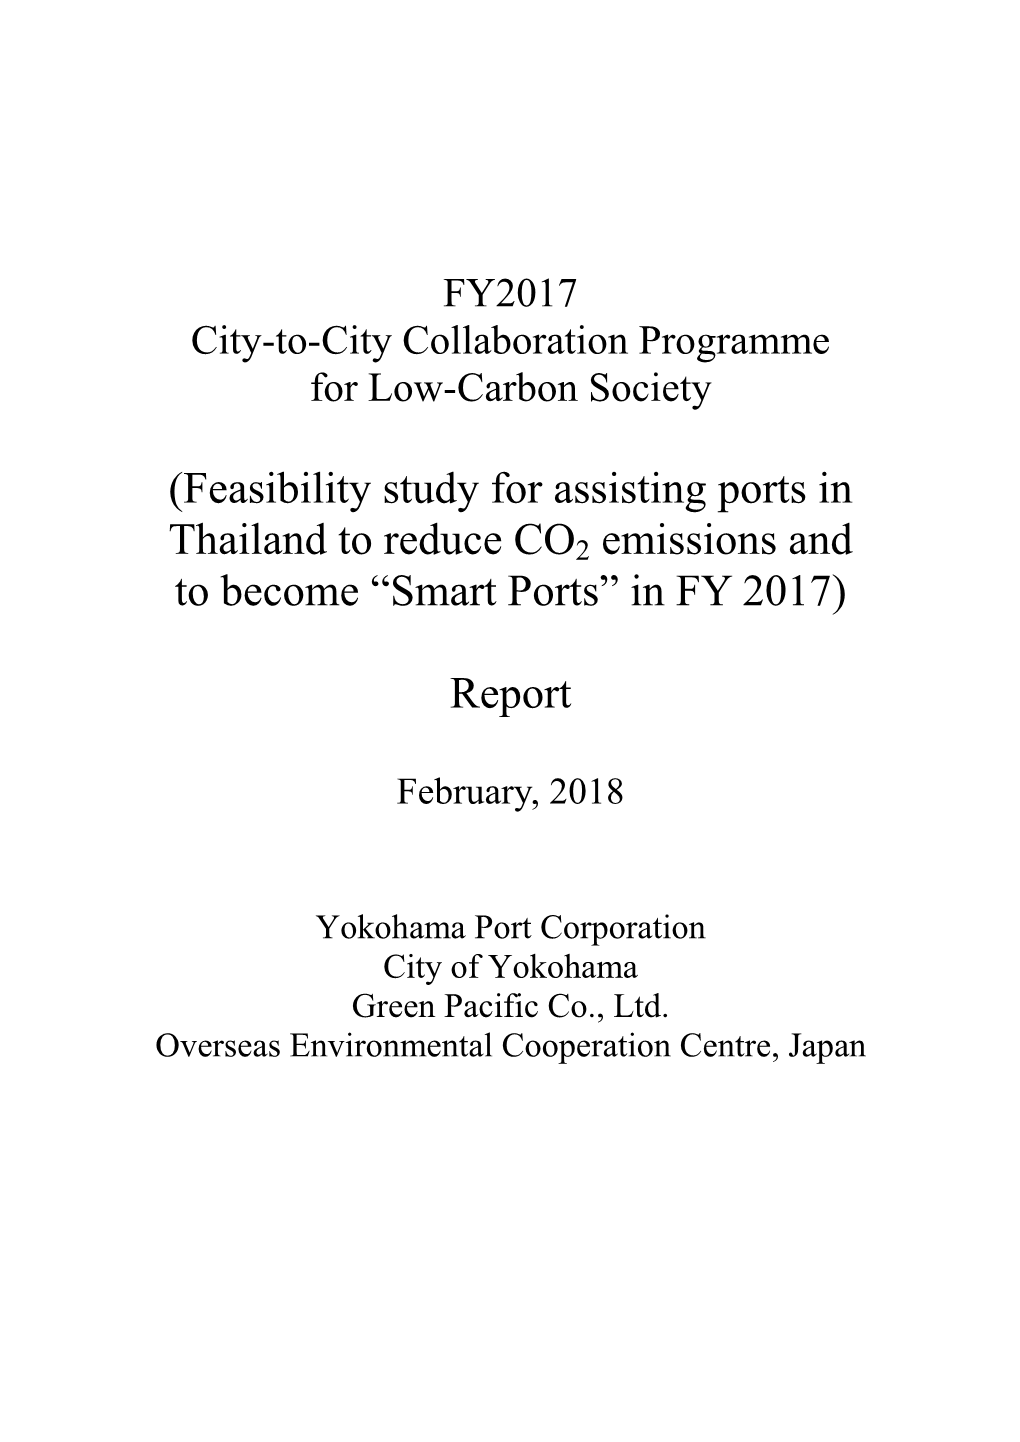 (Feasibility Study for Assisting Ports in Thailand to Reduce CO2 Emissions and to Become “Smart Ports” in FY 2017) Report